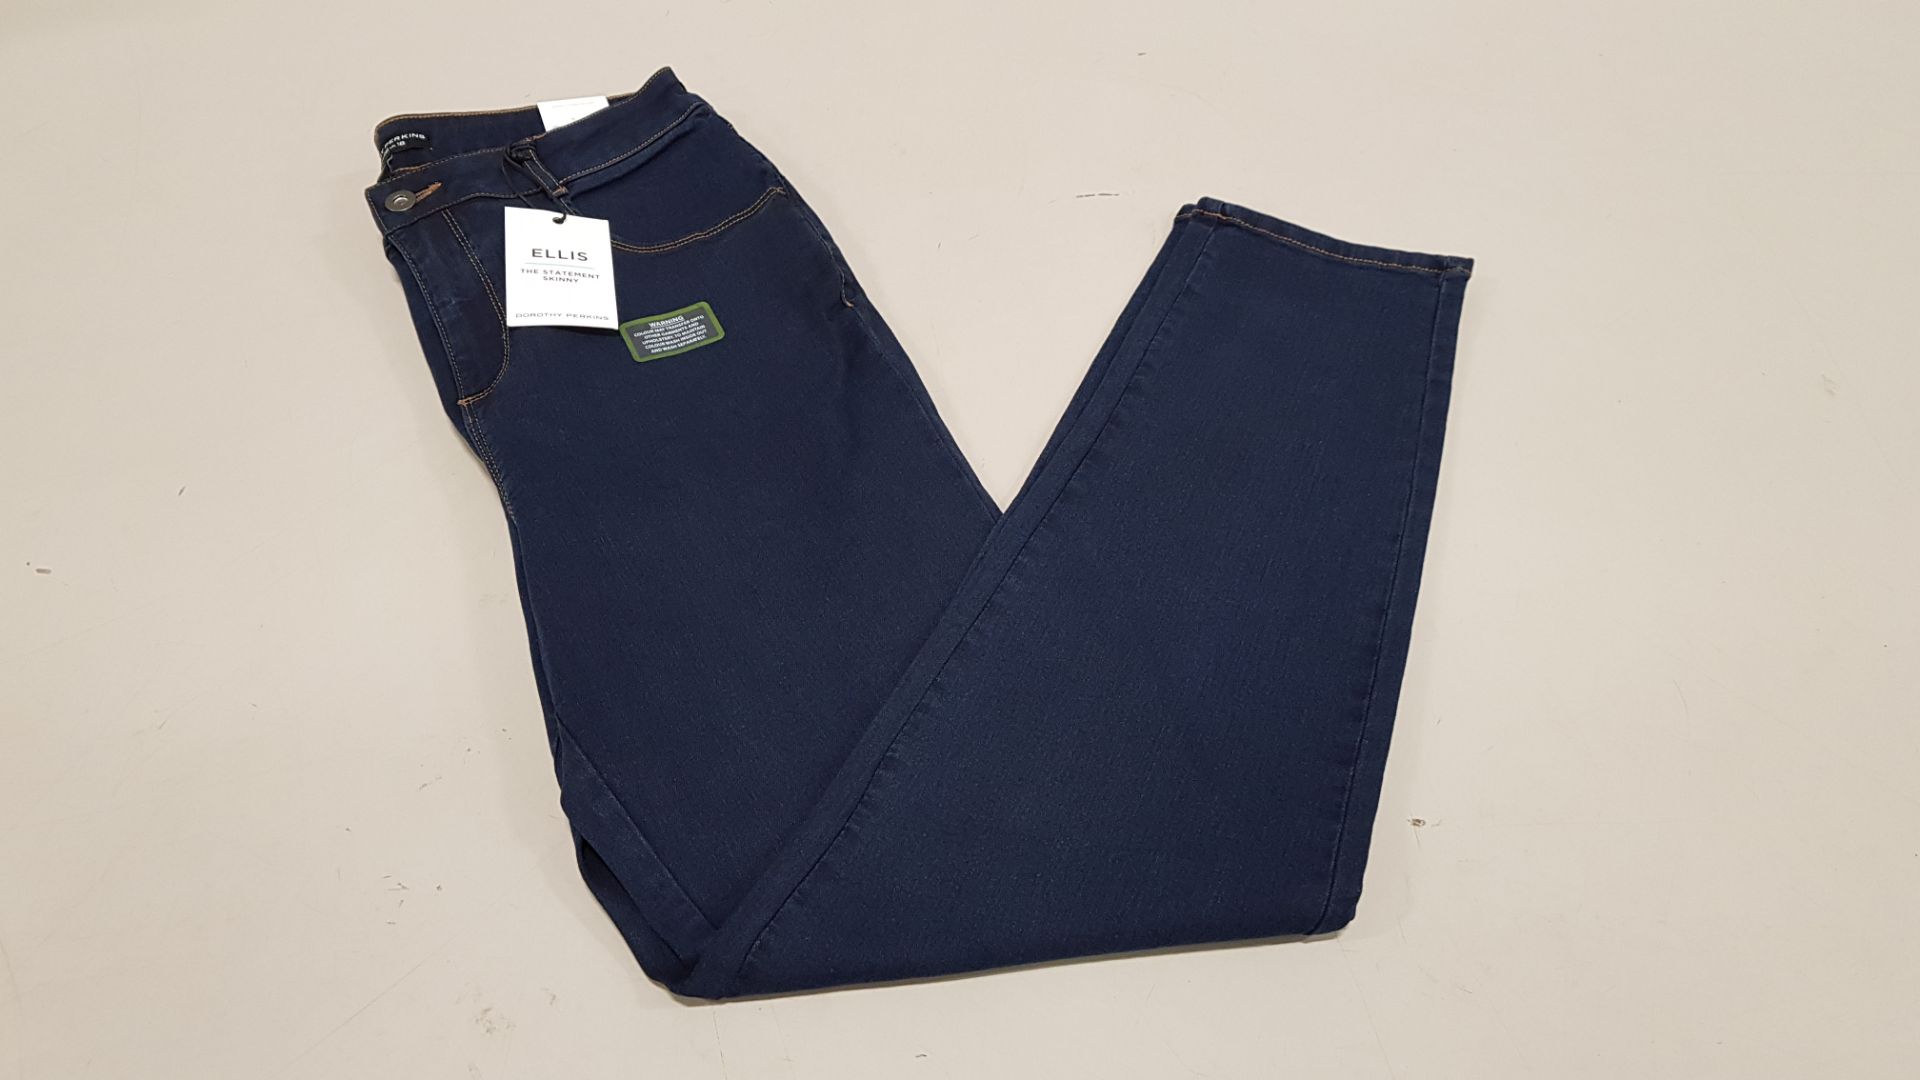 20 X BRAND NEW DOROTHY PERKINS DP CURVE JEANS UK SIZE 18 RRP £15.00 (TOTAL RRP £300.00)